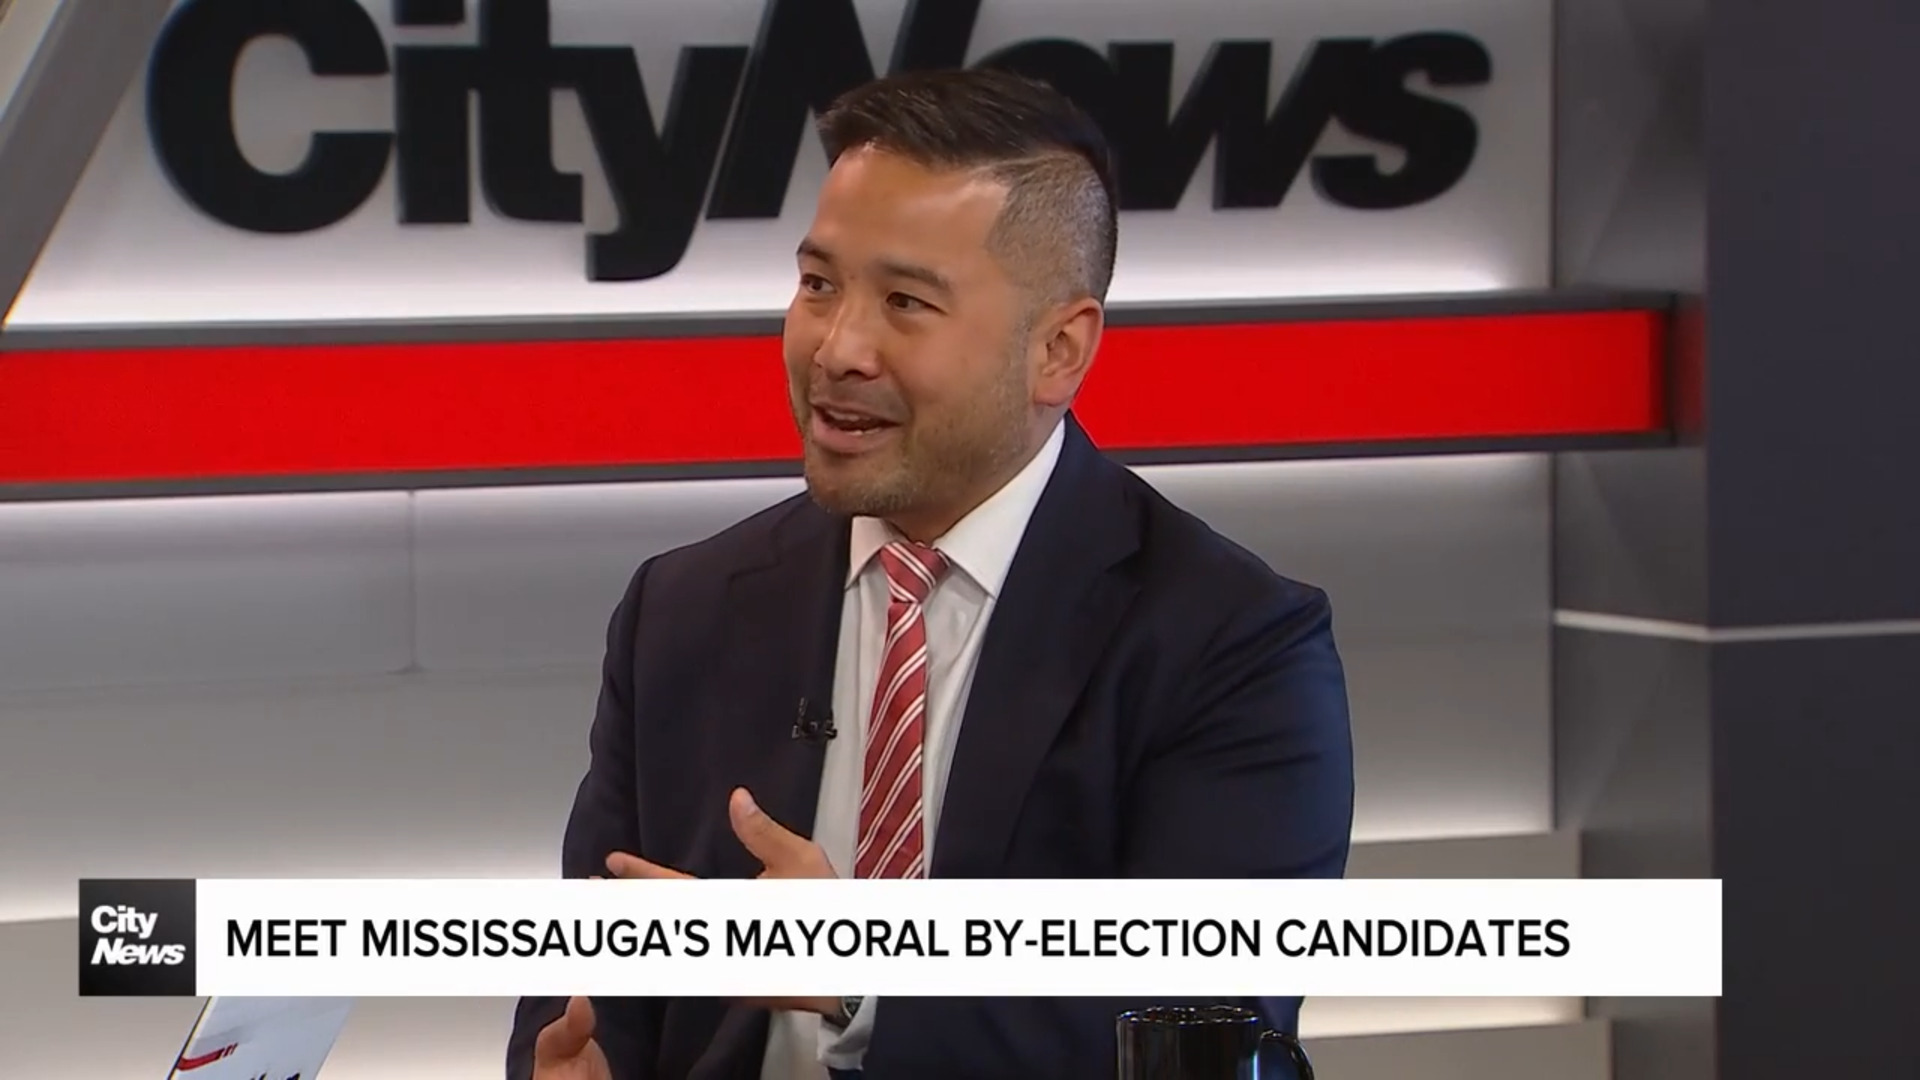 Mississauga Mayoral candidate Alvin Tedjo proposes residential property tax freeze